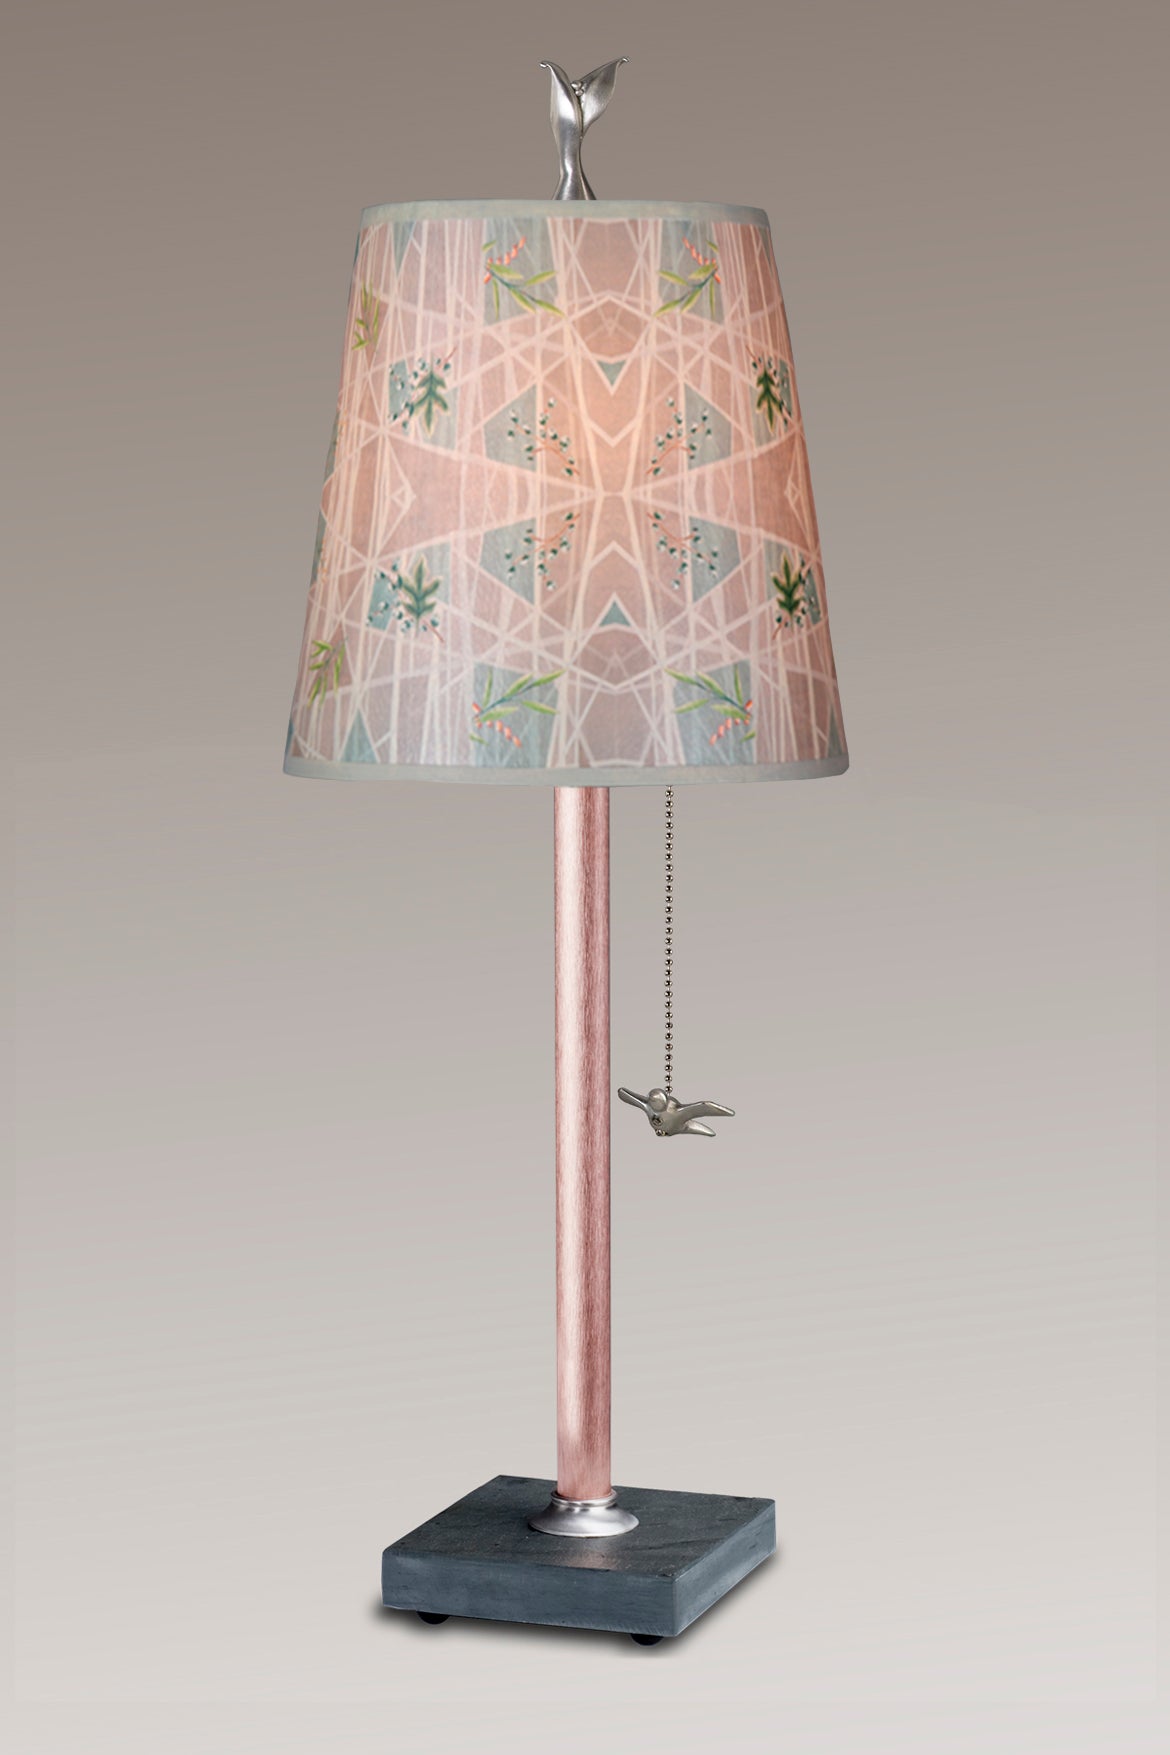 Janna Ugone &amp; Co Table Lamps Copper Table Lamp with Small Drum in Prism